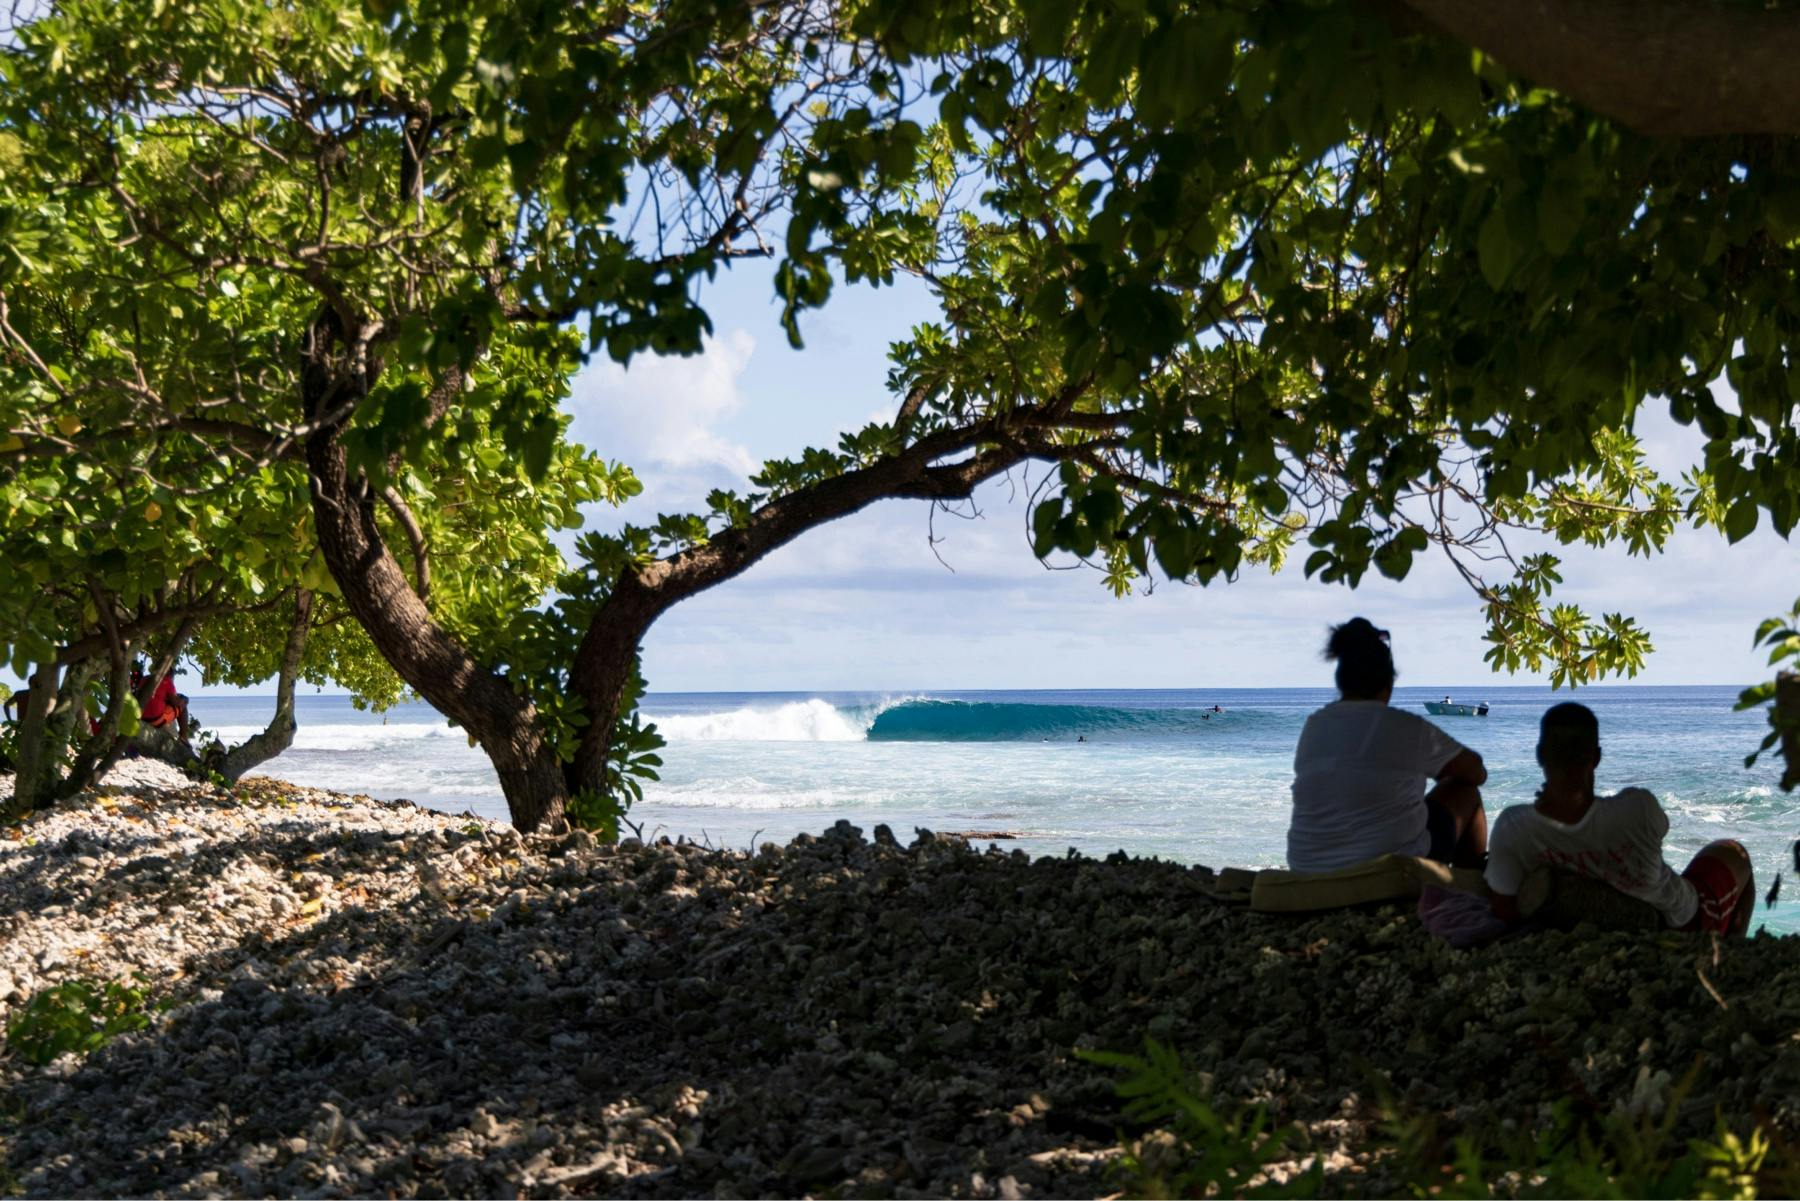 Two men sit on a beach while watching the surf photo by Ryan Chachi Craig